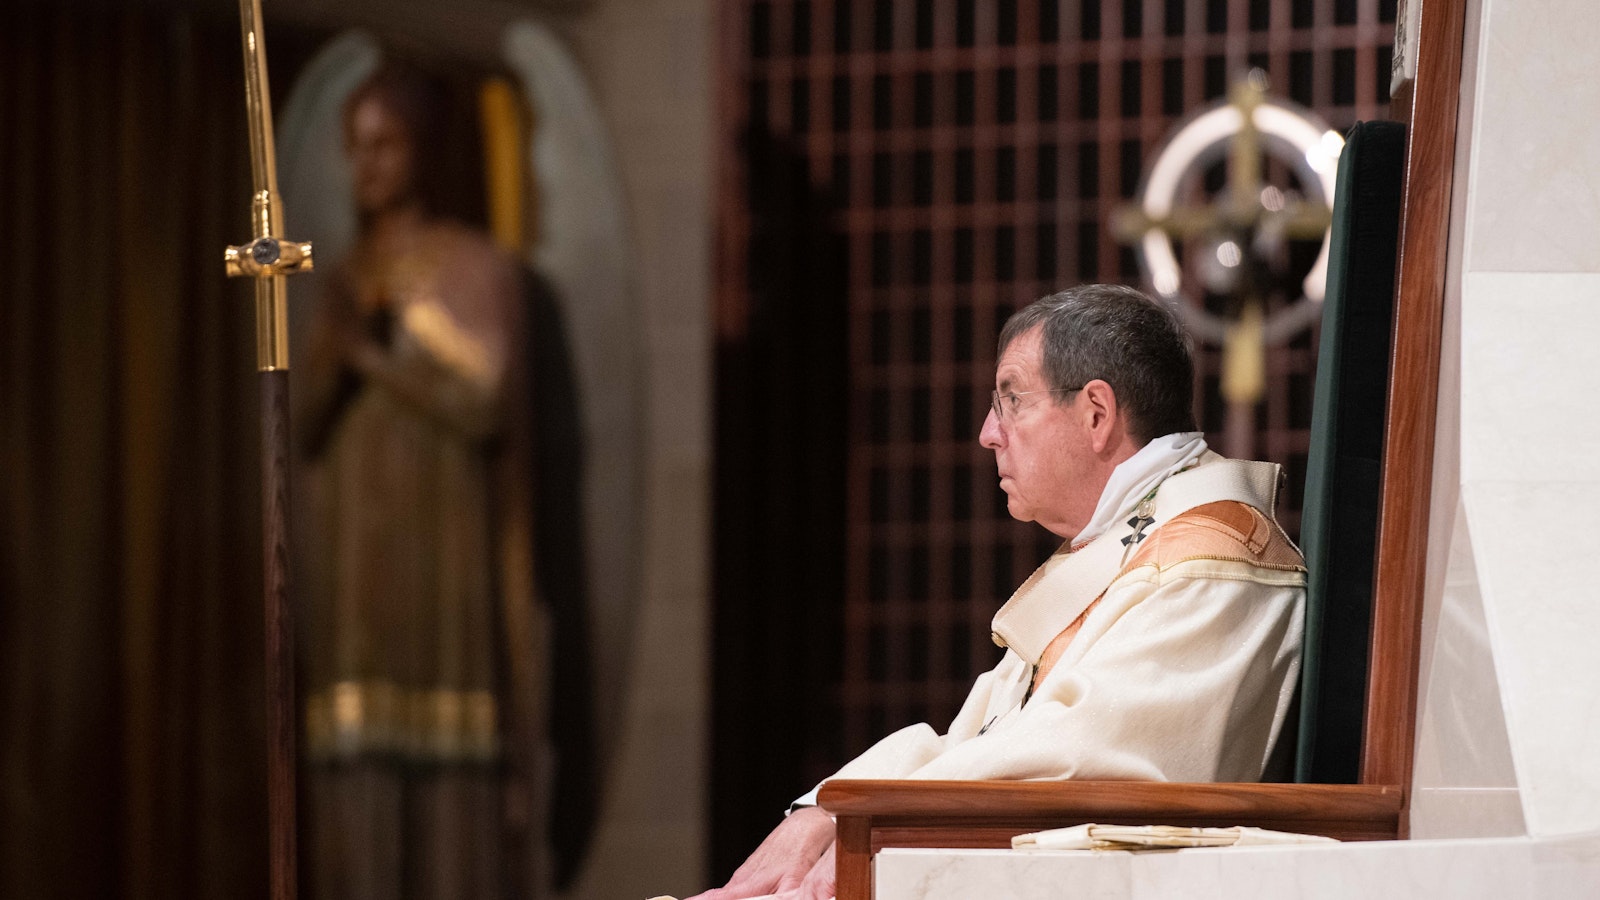 Archbishop Vigneron sits in his cathedra — his episcopal seat — at the Cathedral of the Most Blessed Sacrament during a Mass of consecration for two consecrated virgins on Sept. 25, 2021. (Tim Fuller | Special to Detroit Catholic)